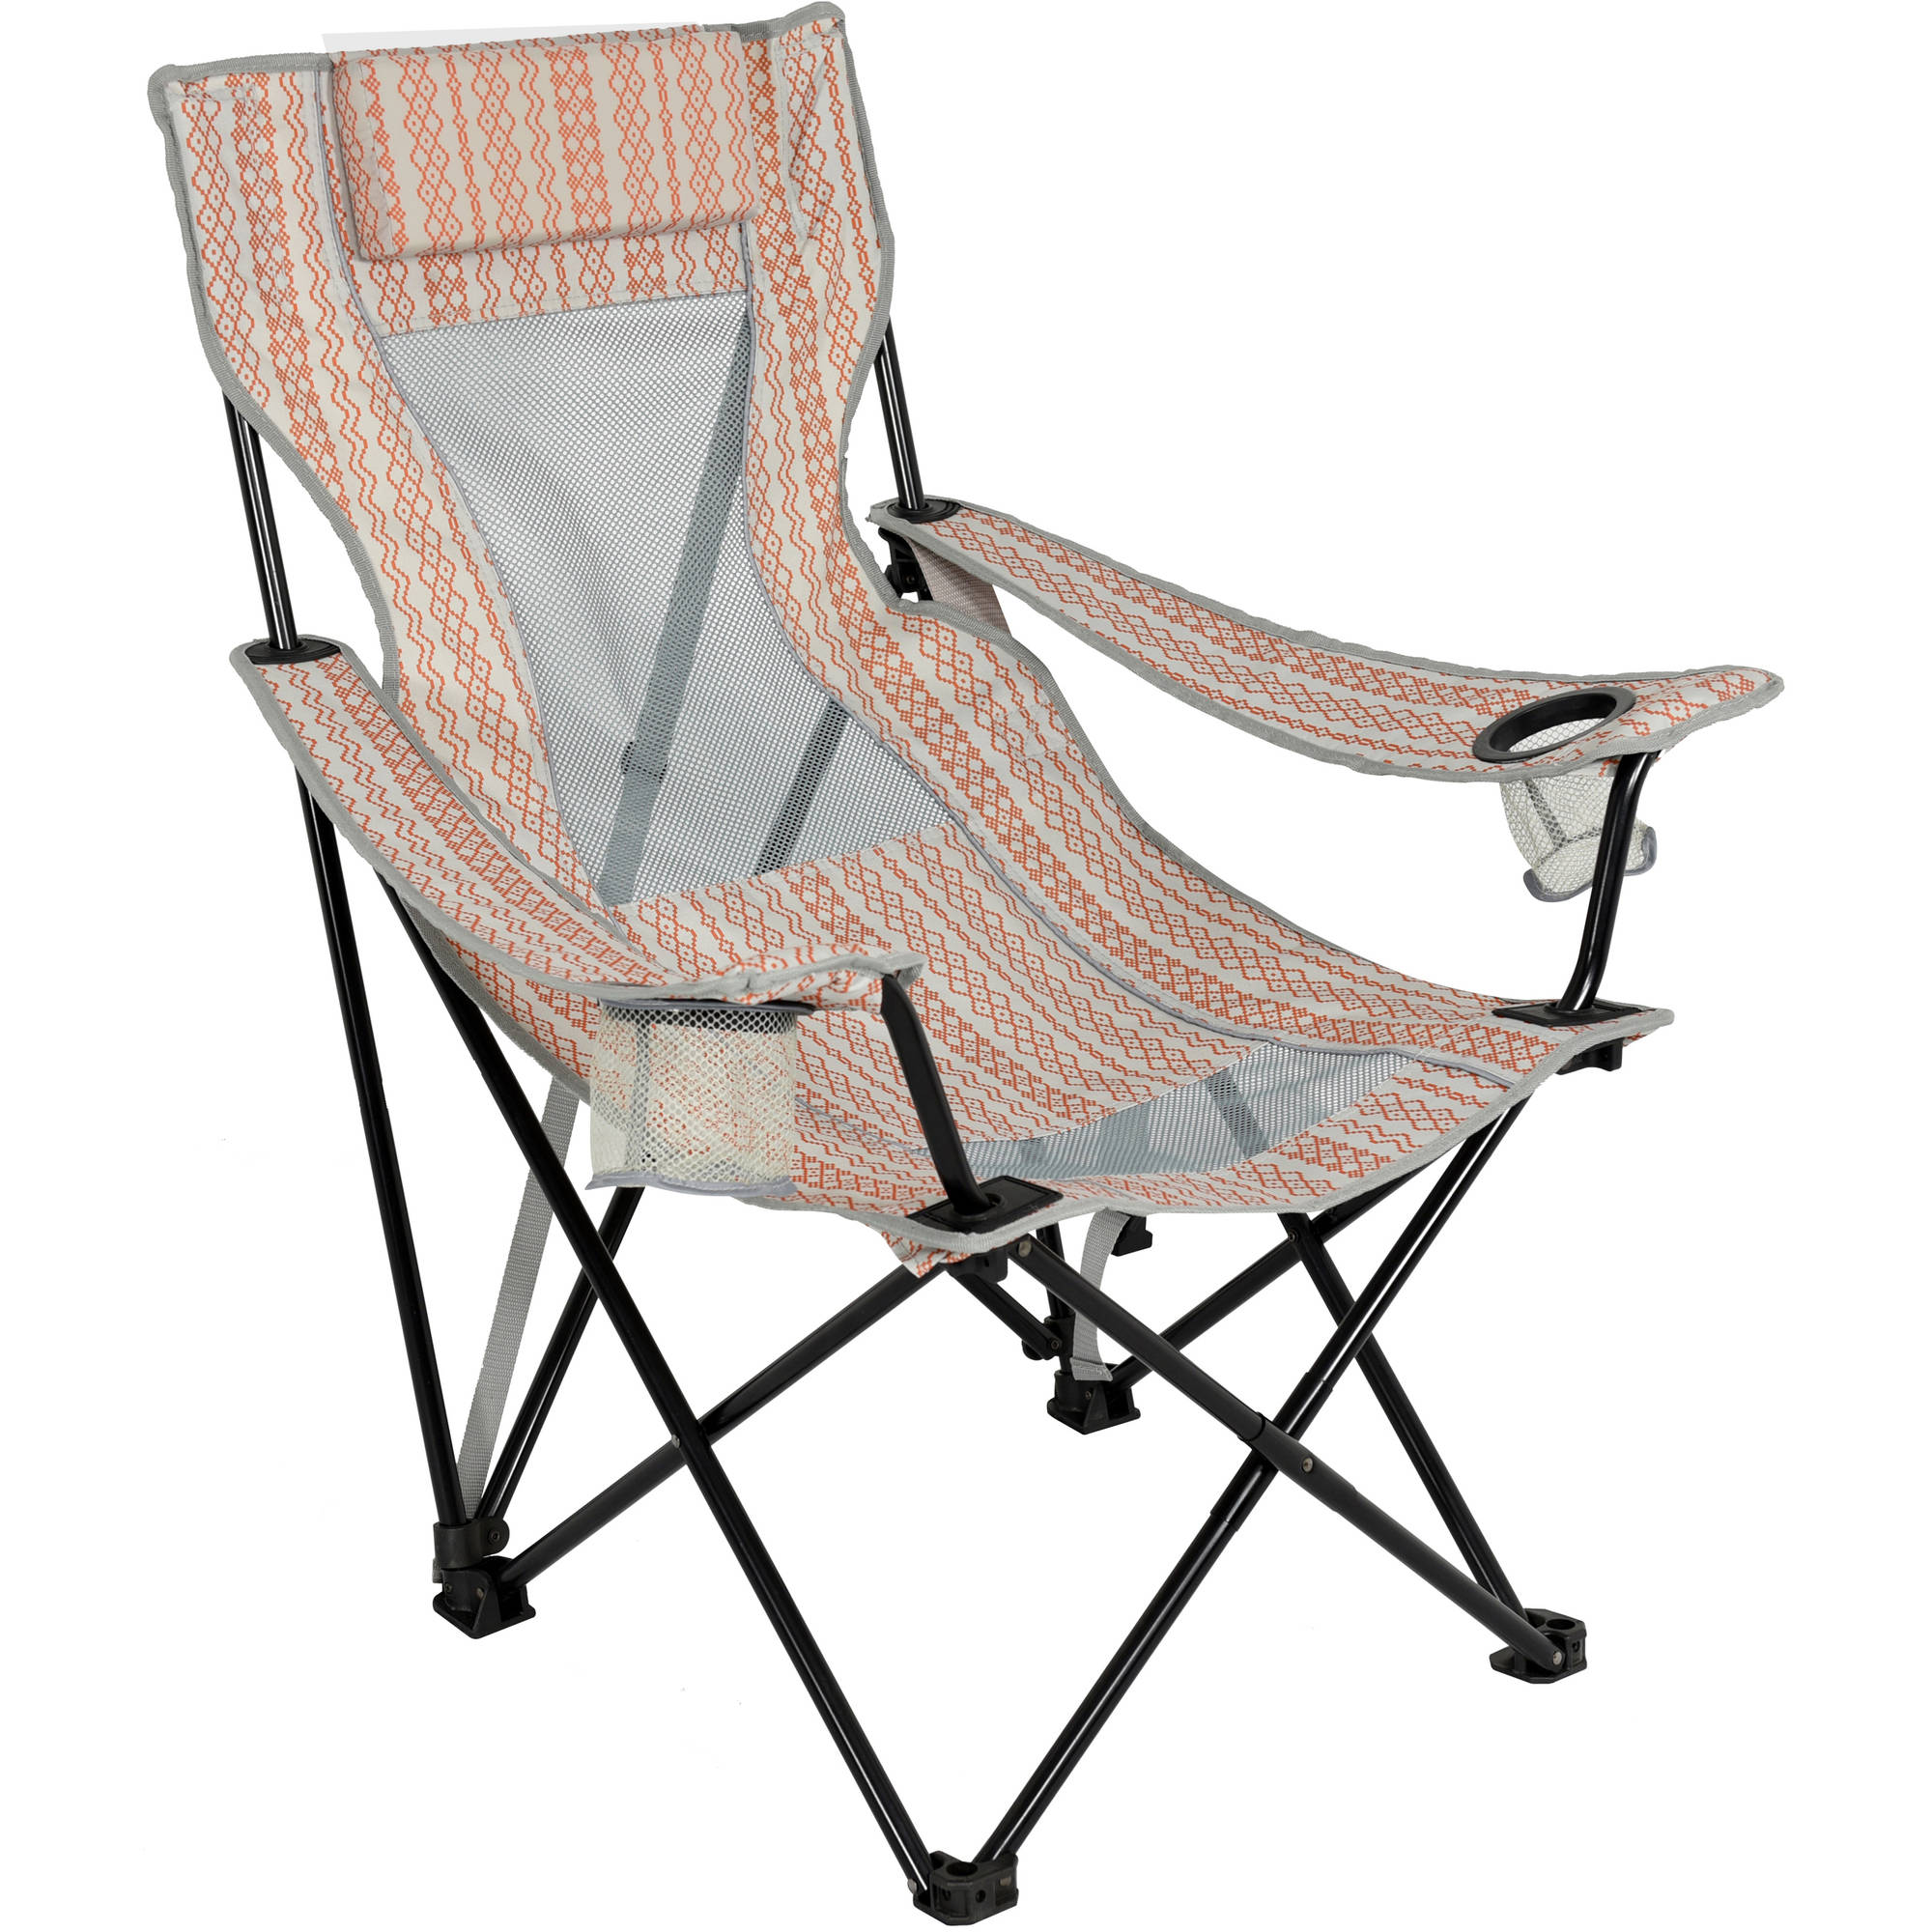 Oversized Mesh Lounge Chair - image 4 of 8